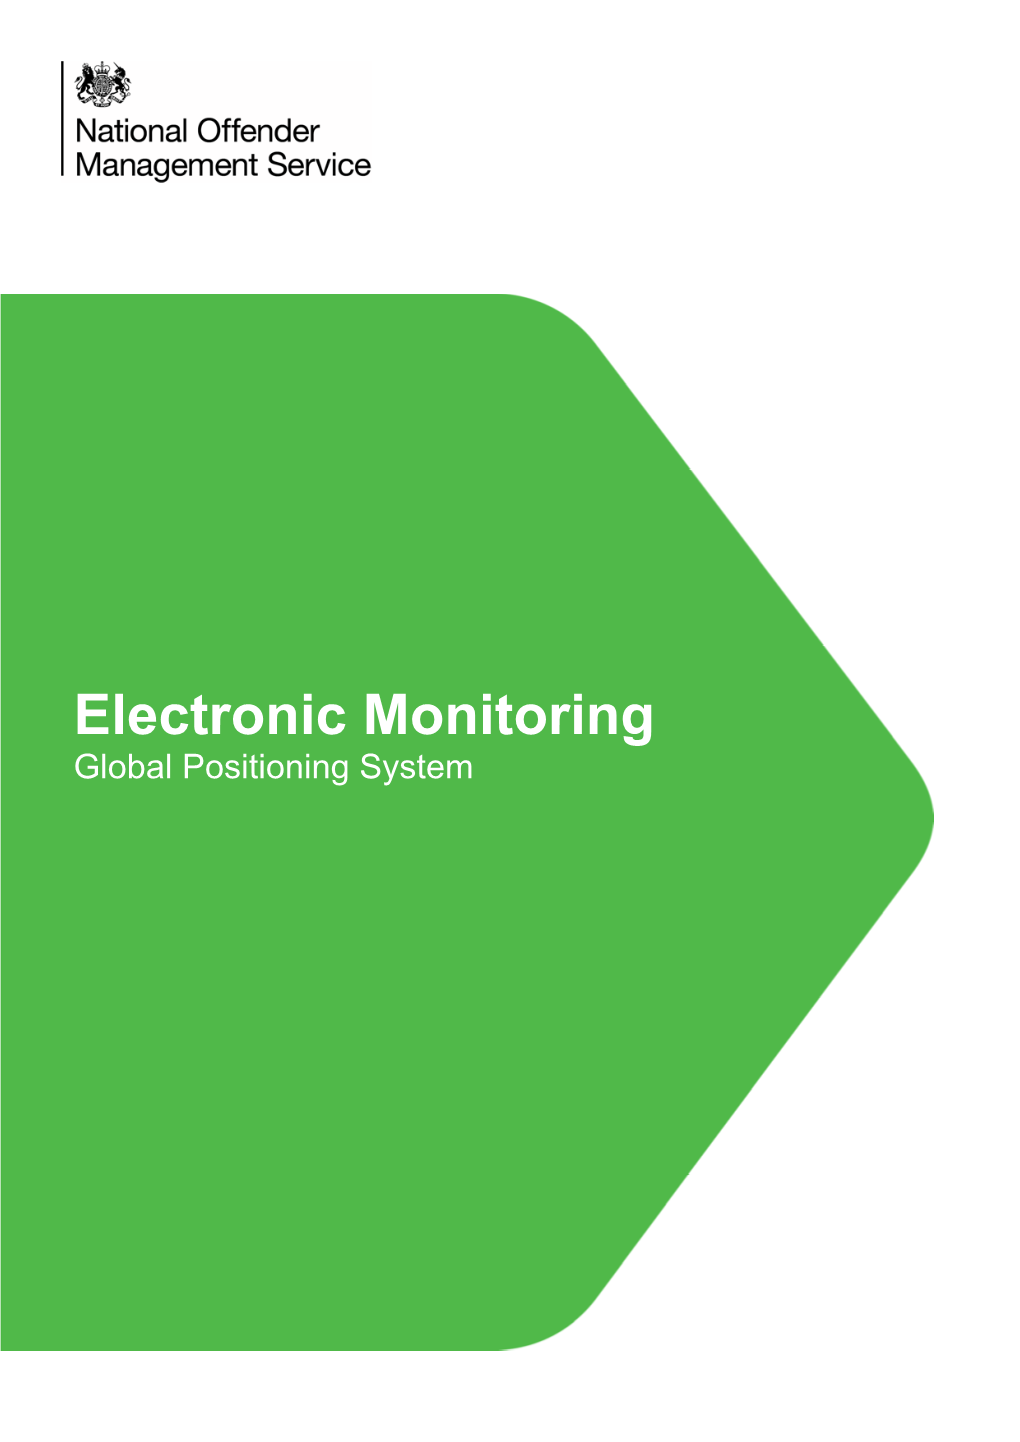 Electronic Monitoring Global Positioning System